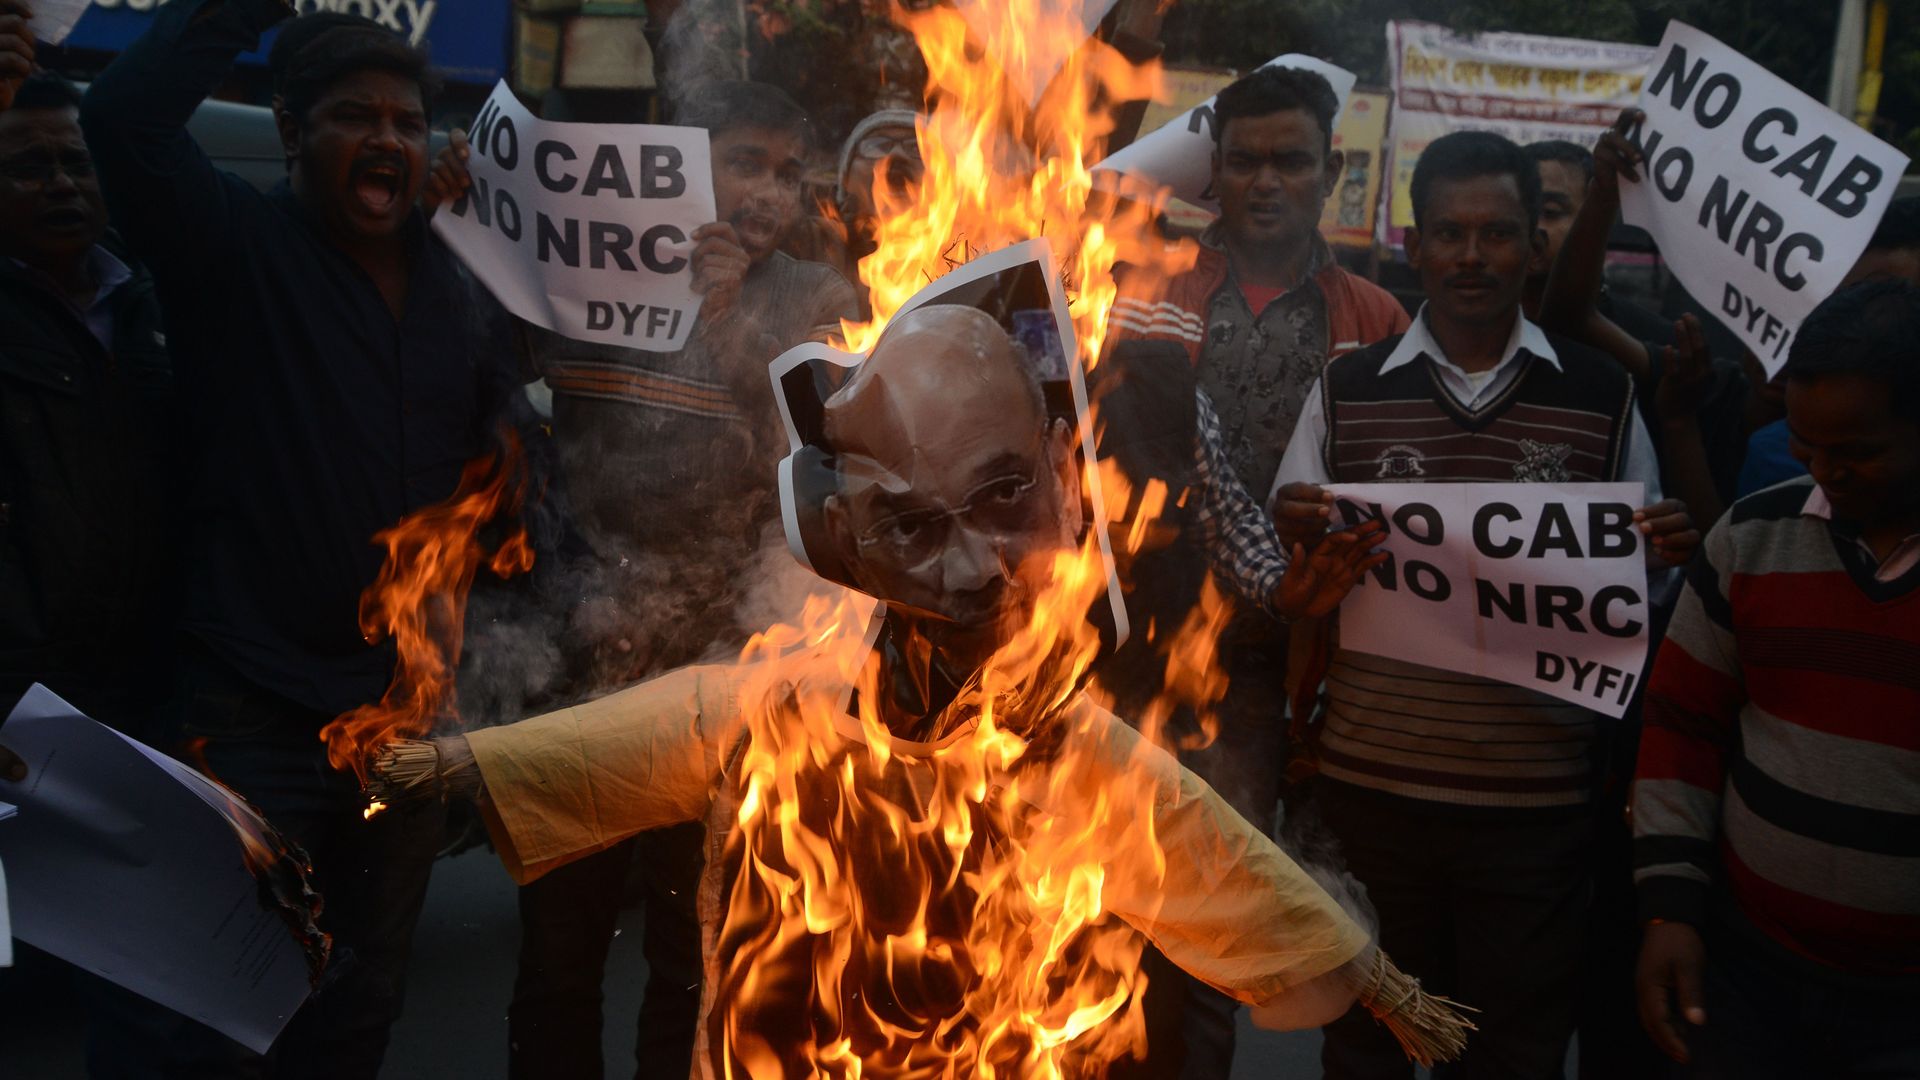 Activists burn an effigy of India's Home Minister Amit Shah during a demonstration against the Indian government's Citizenship Amendment Bill in Siliguri on December 14